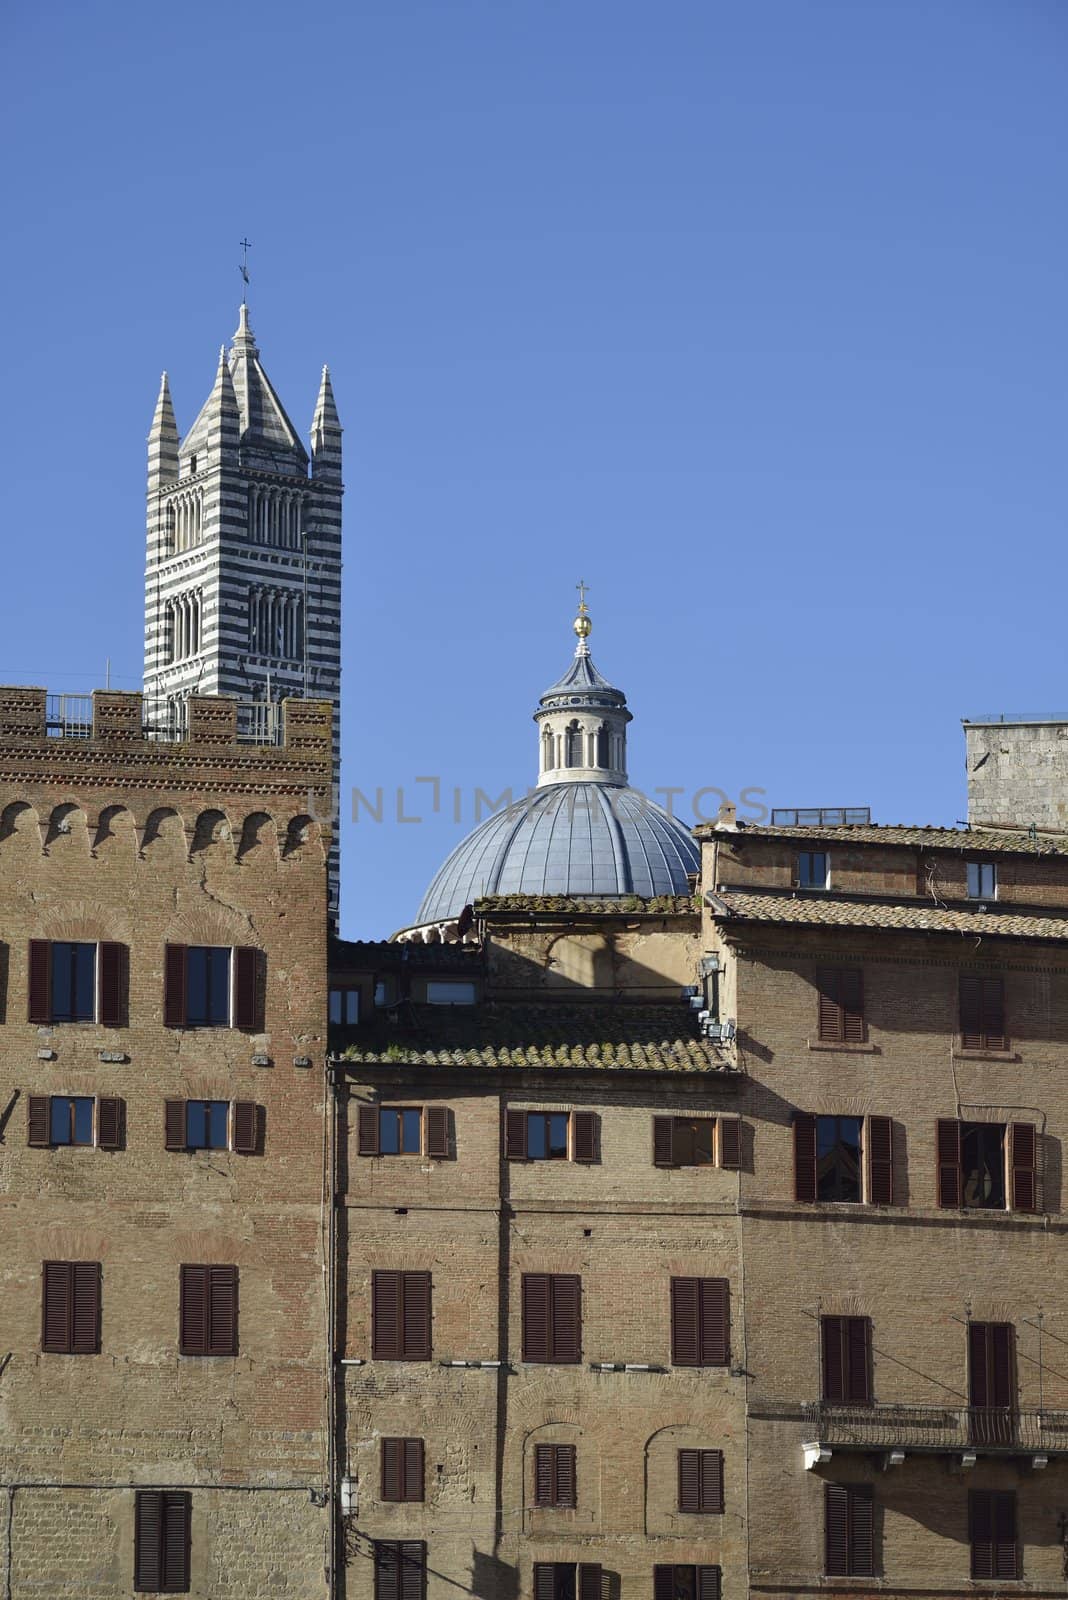 Ancient palace in Siena by mizio1970